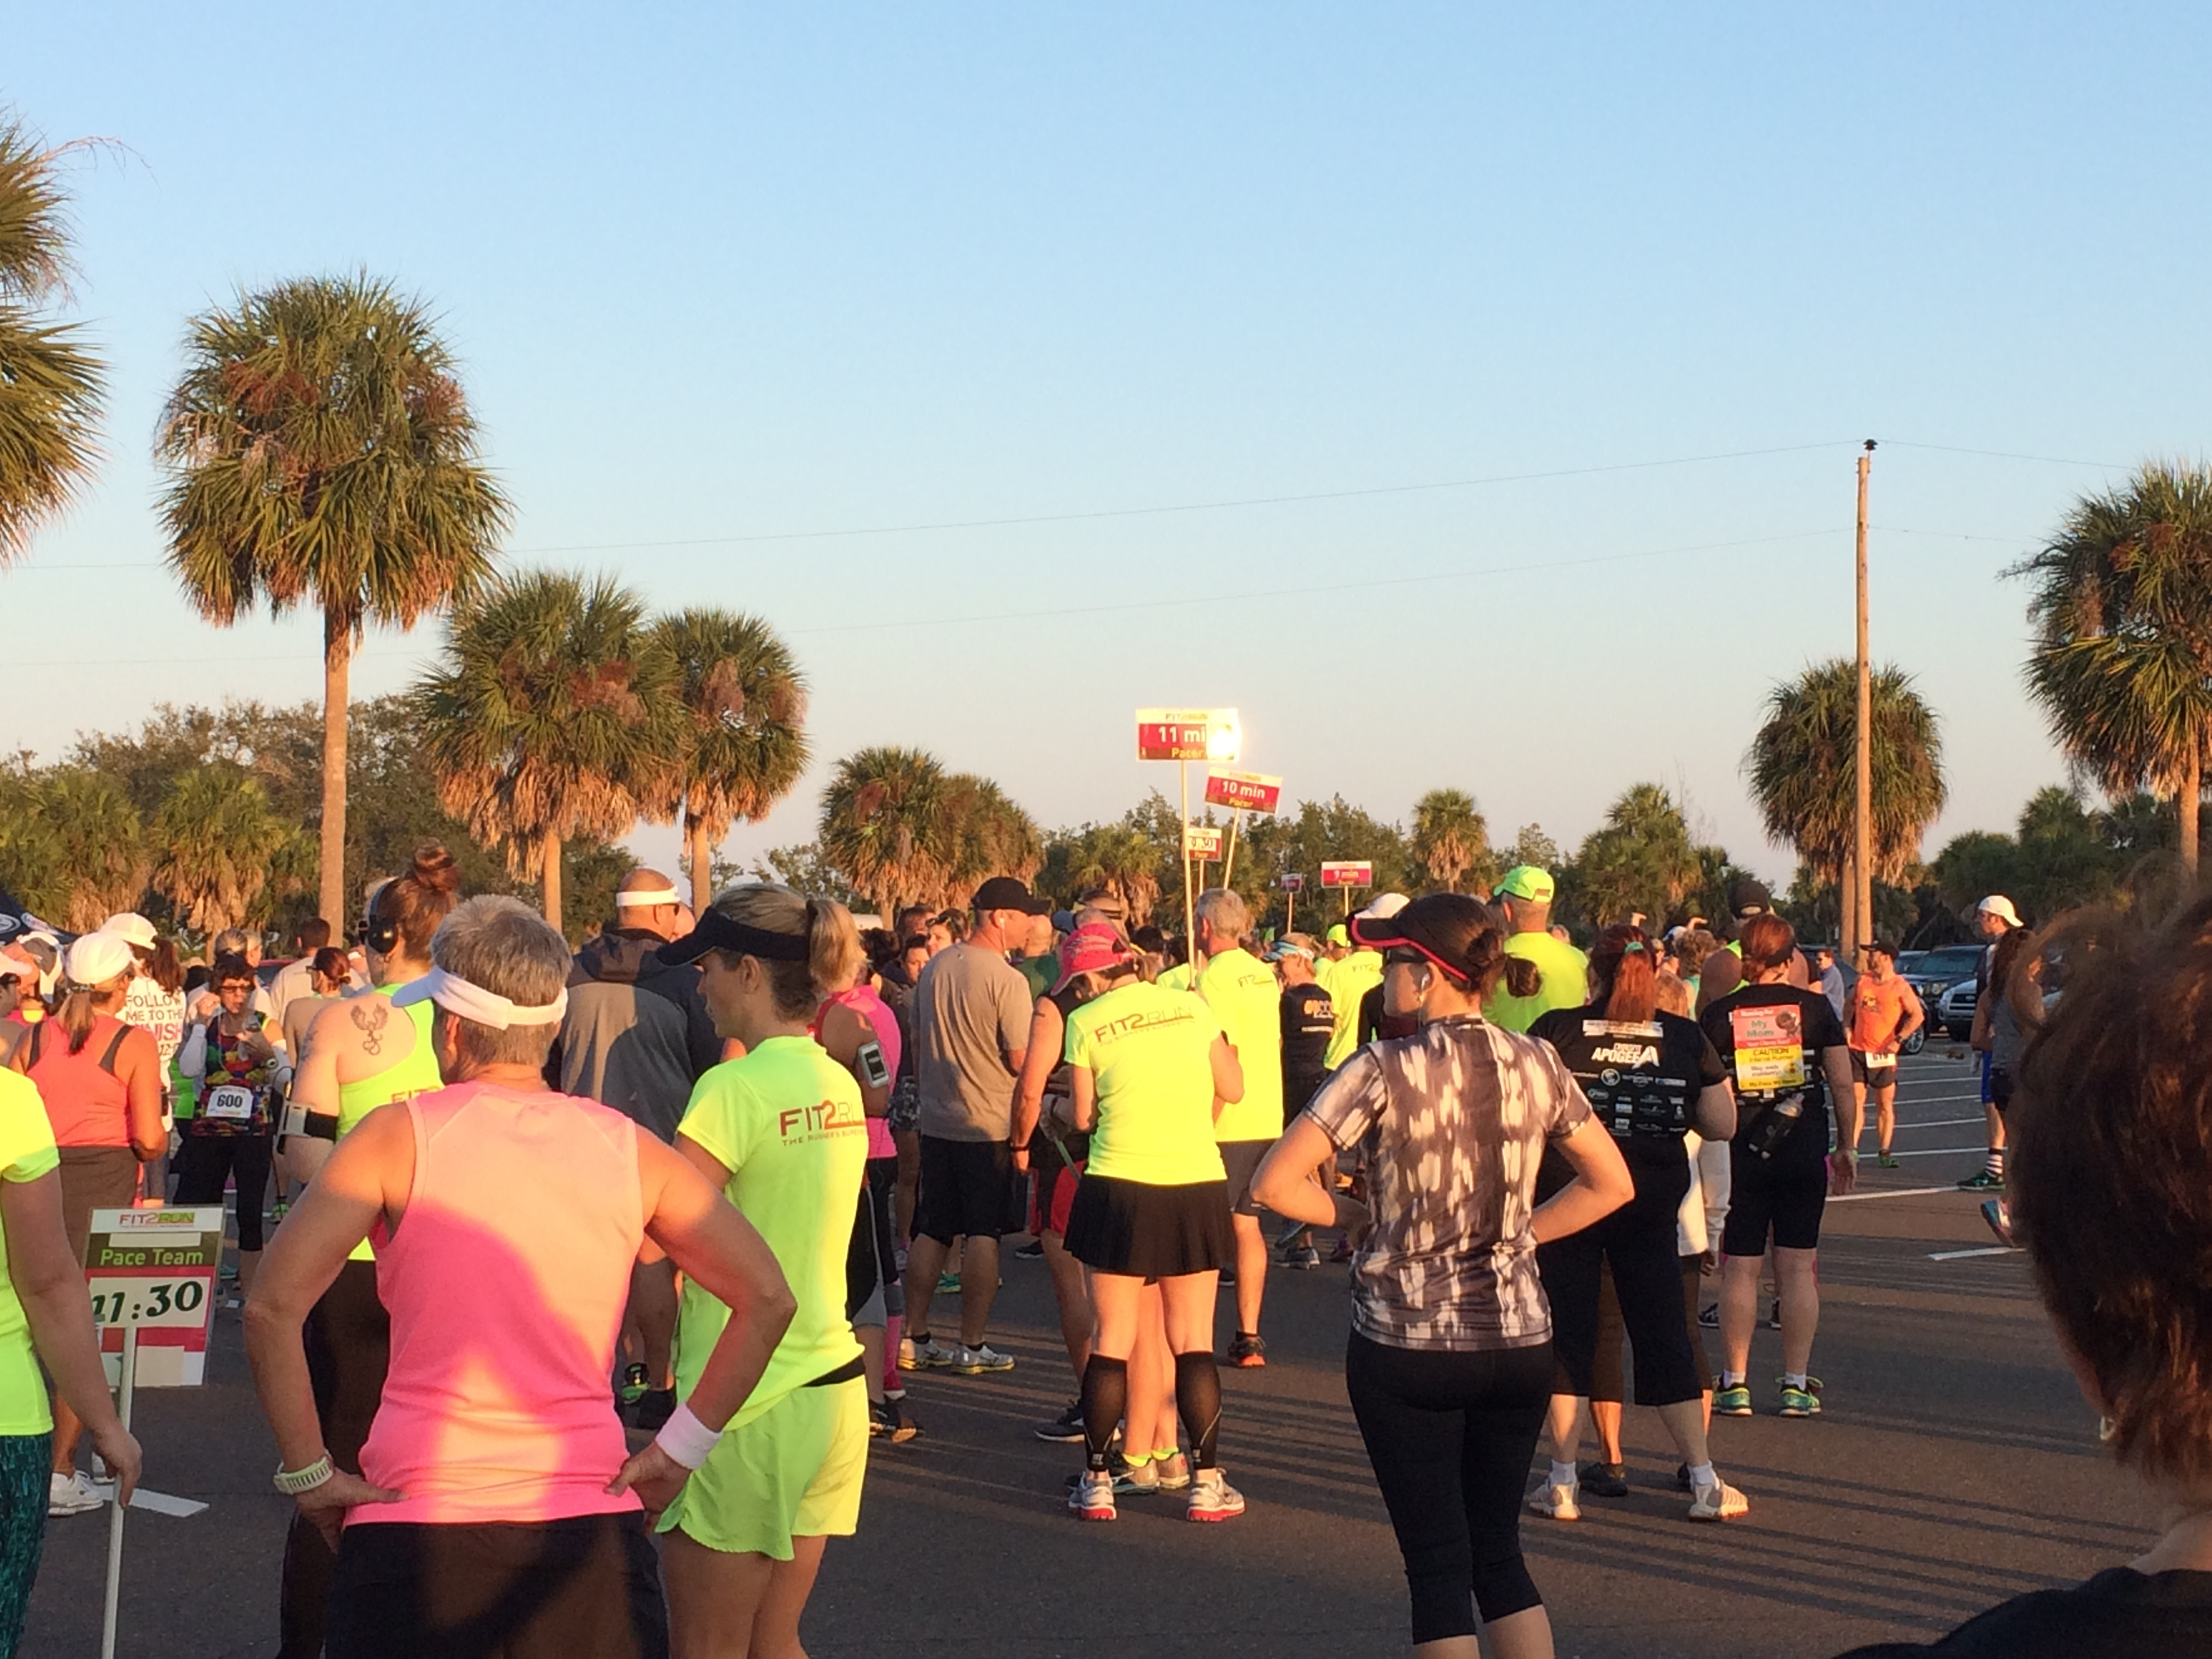 Starting line of the 2016 Ronnie's Run 10 Mile Race at Fort DeSoto.